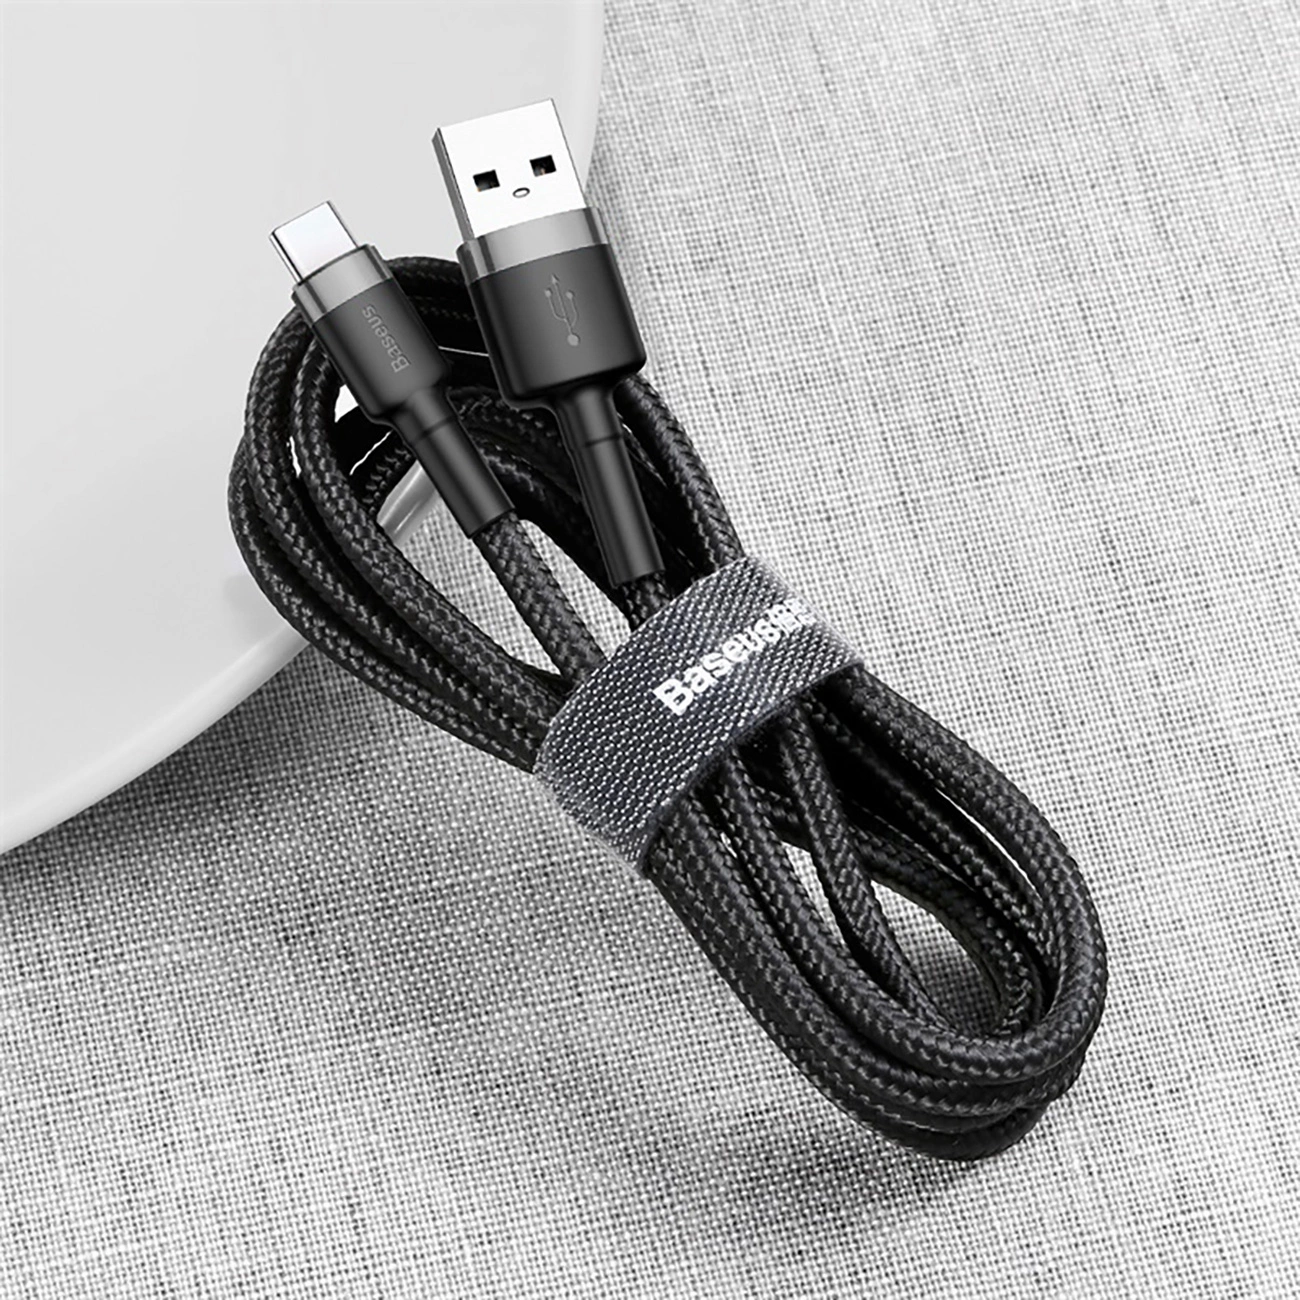 Baseus Cafule USB-A / USB-C cable rolled up and fastened with Velcro